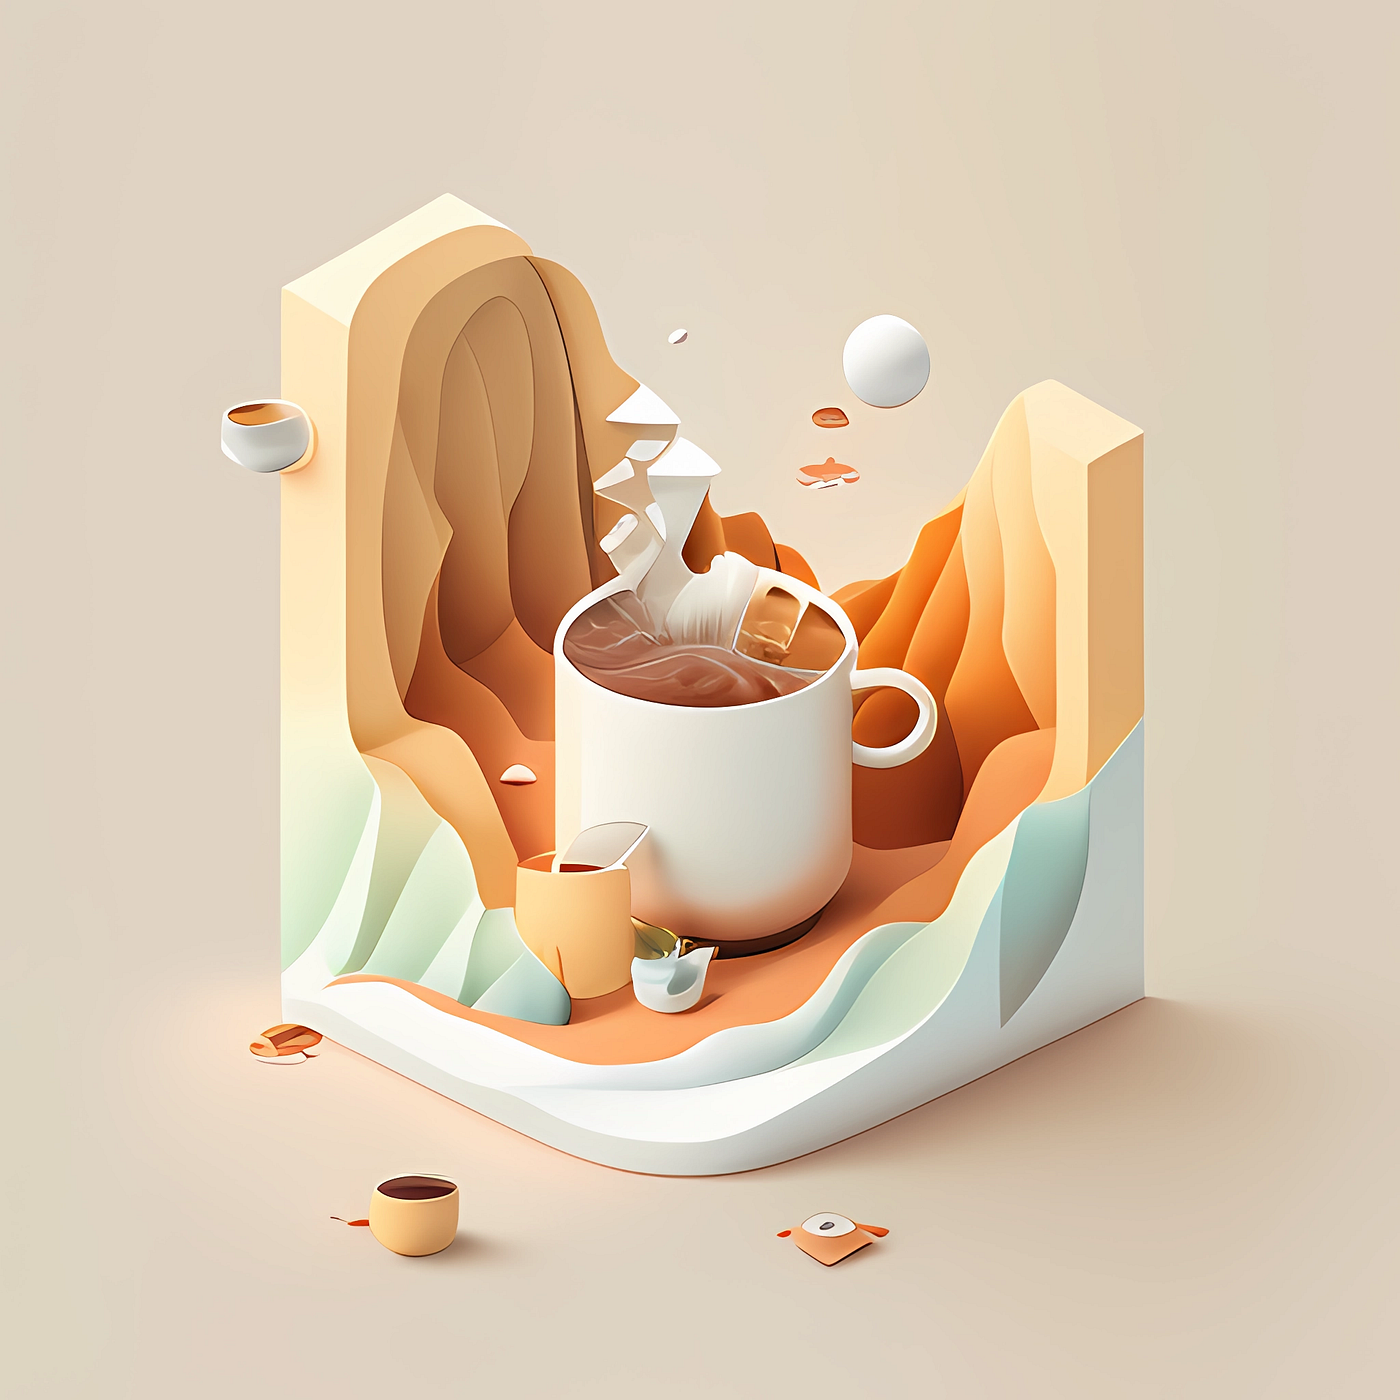 Coffee guide Vectors & Illustrations for Free Download